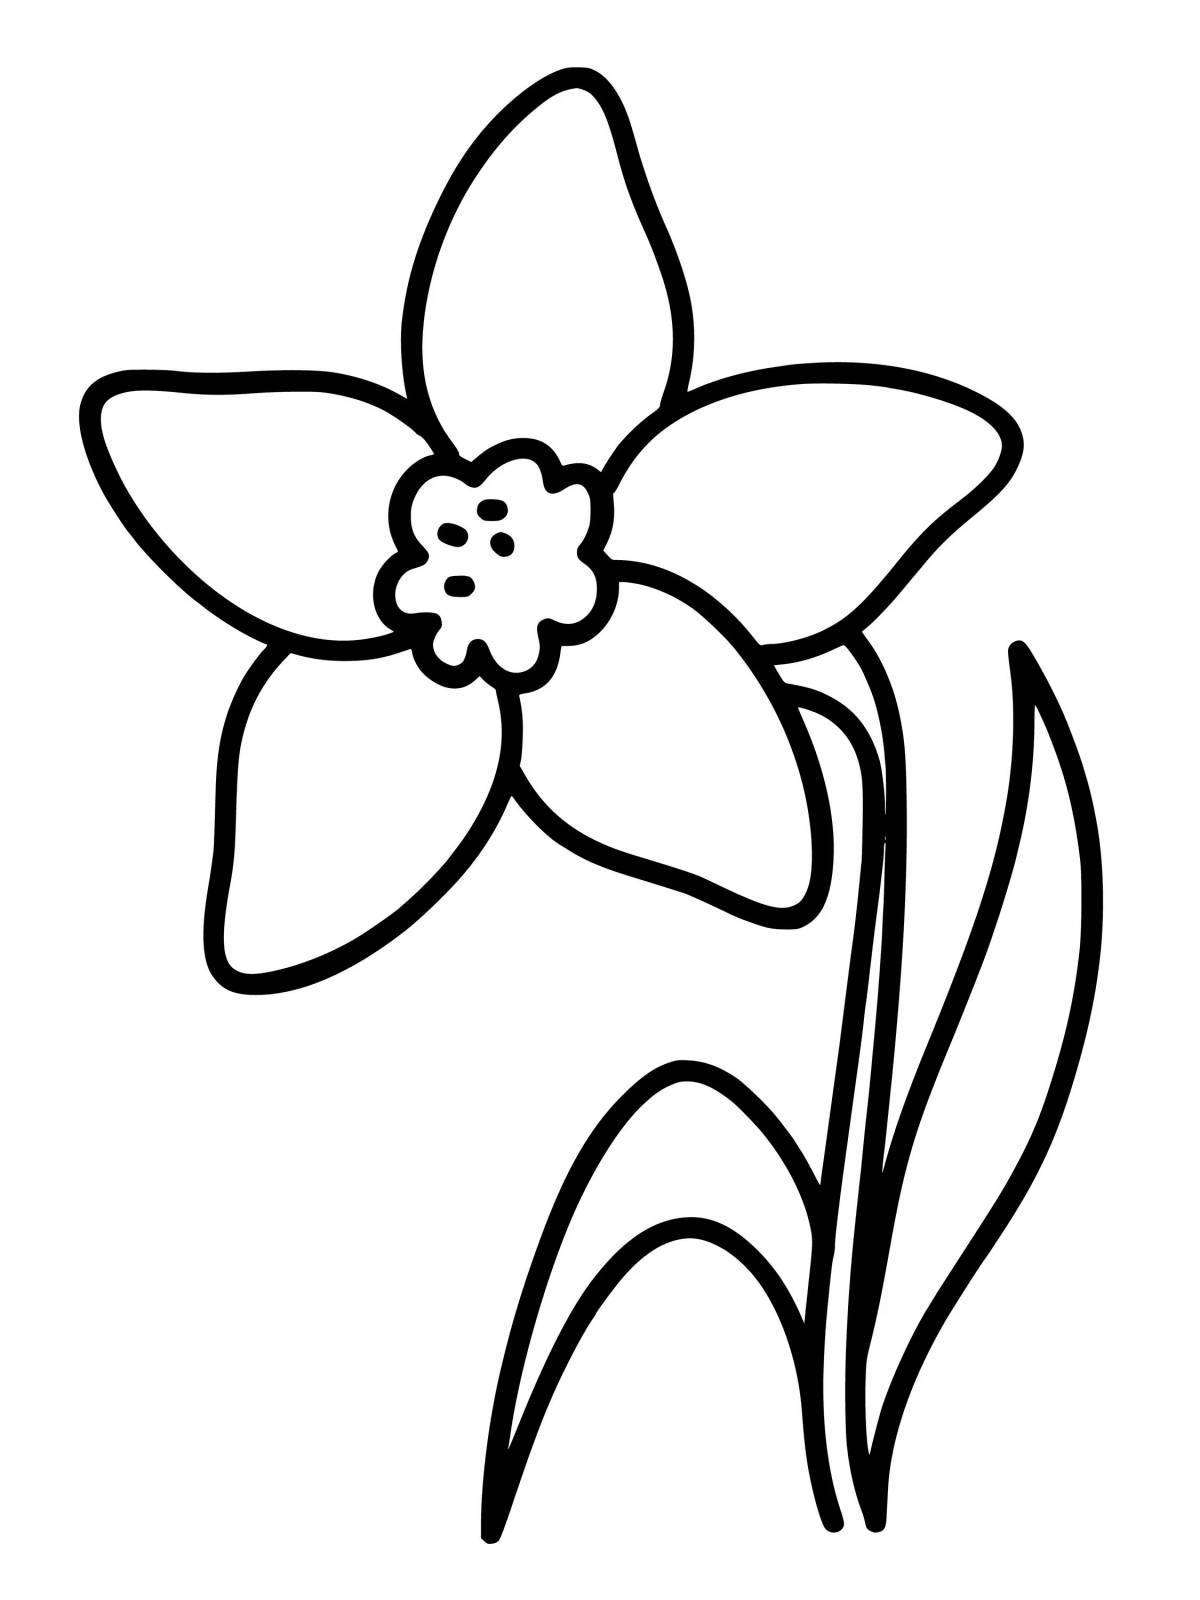 Coloring book glowing narcissus flower